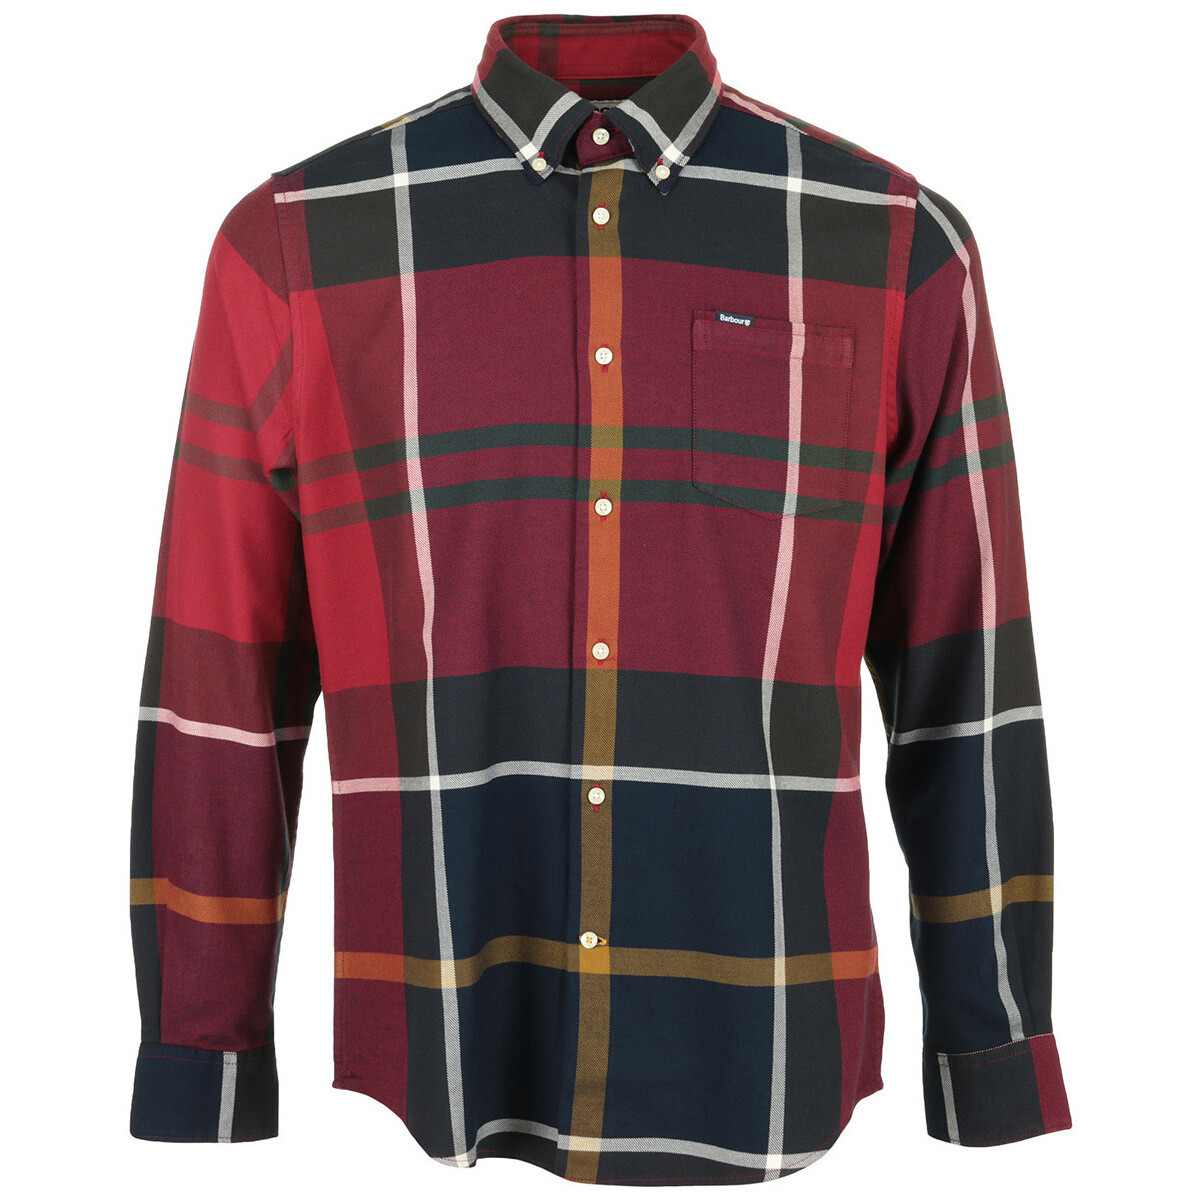 Textil knitted Camisas mangas comprida Barbour Dunoon Tailored Shirt Vermelho